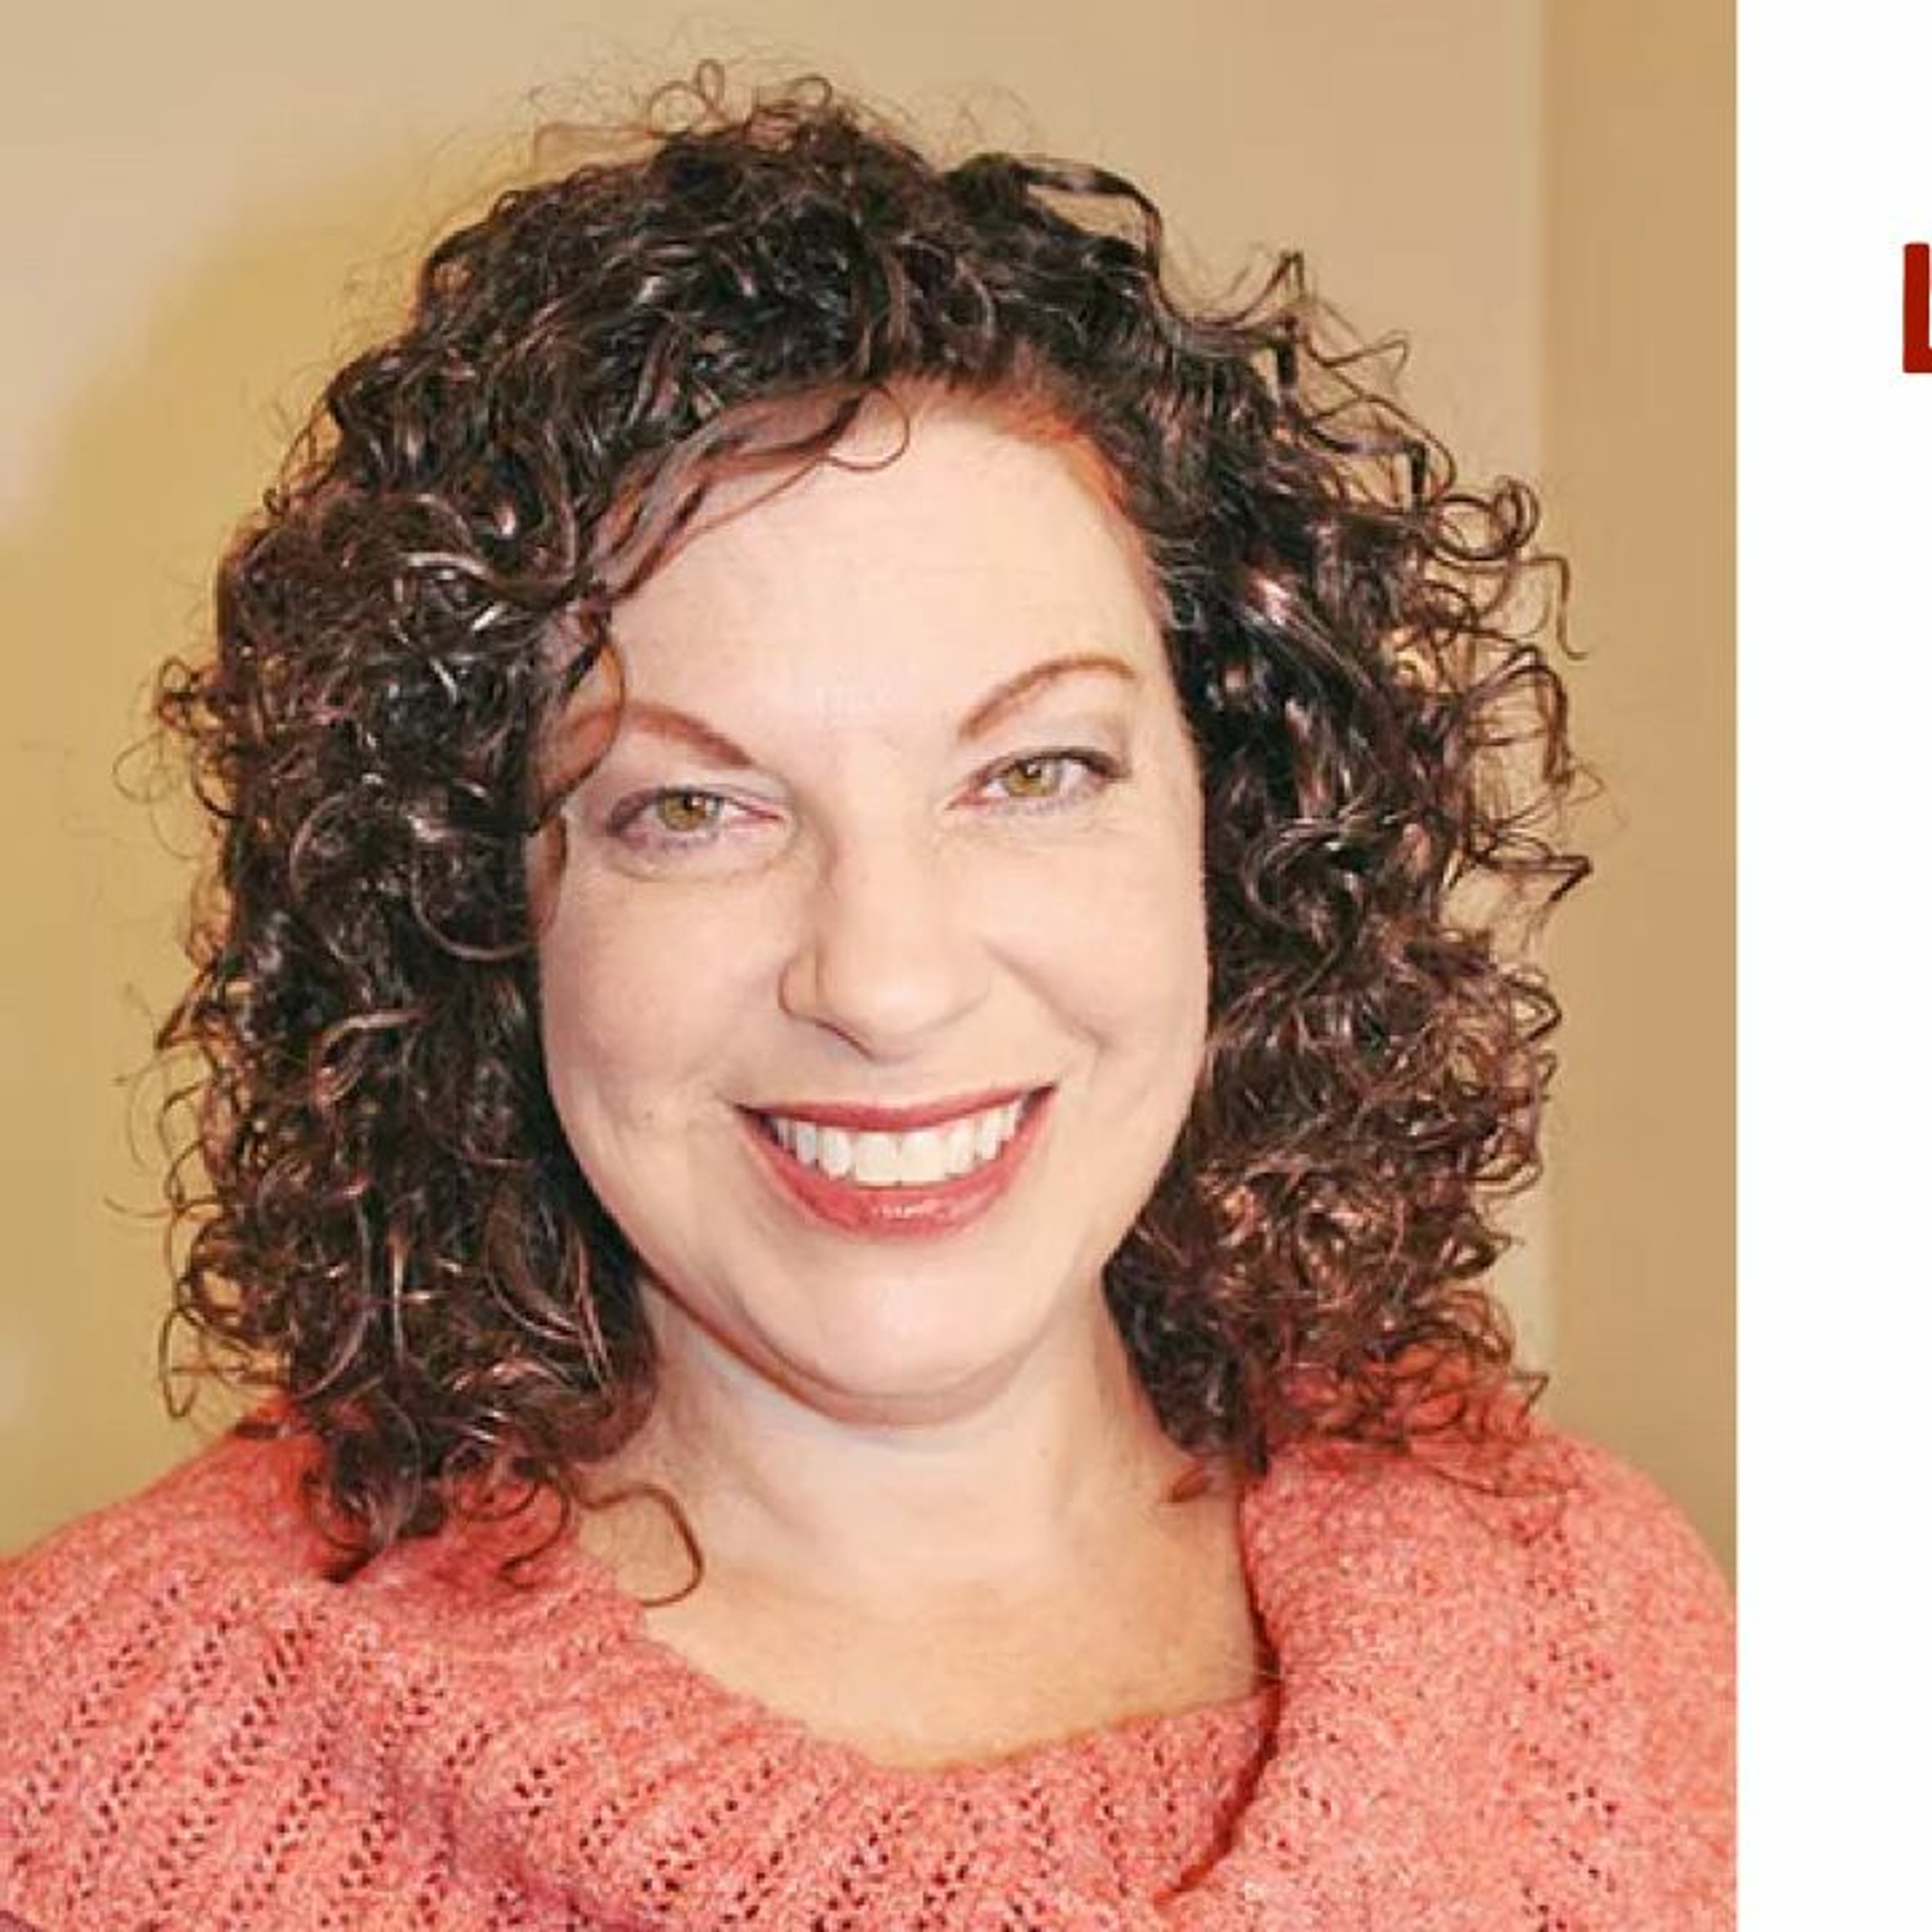 86: Physician Assistant on Staying Healthy During the Pandemic | Lora Greenberg Image